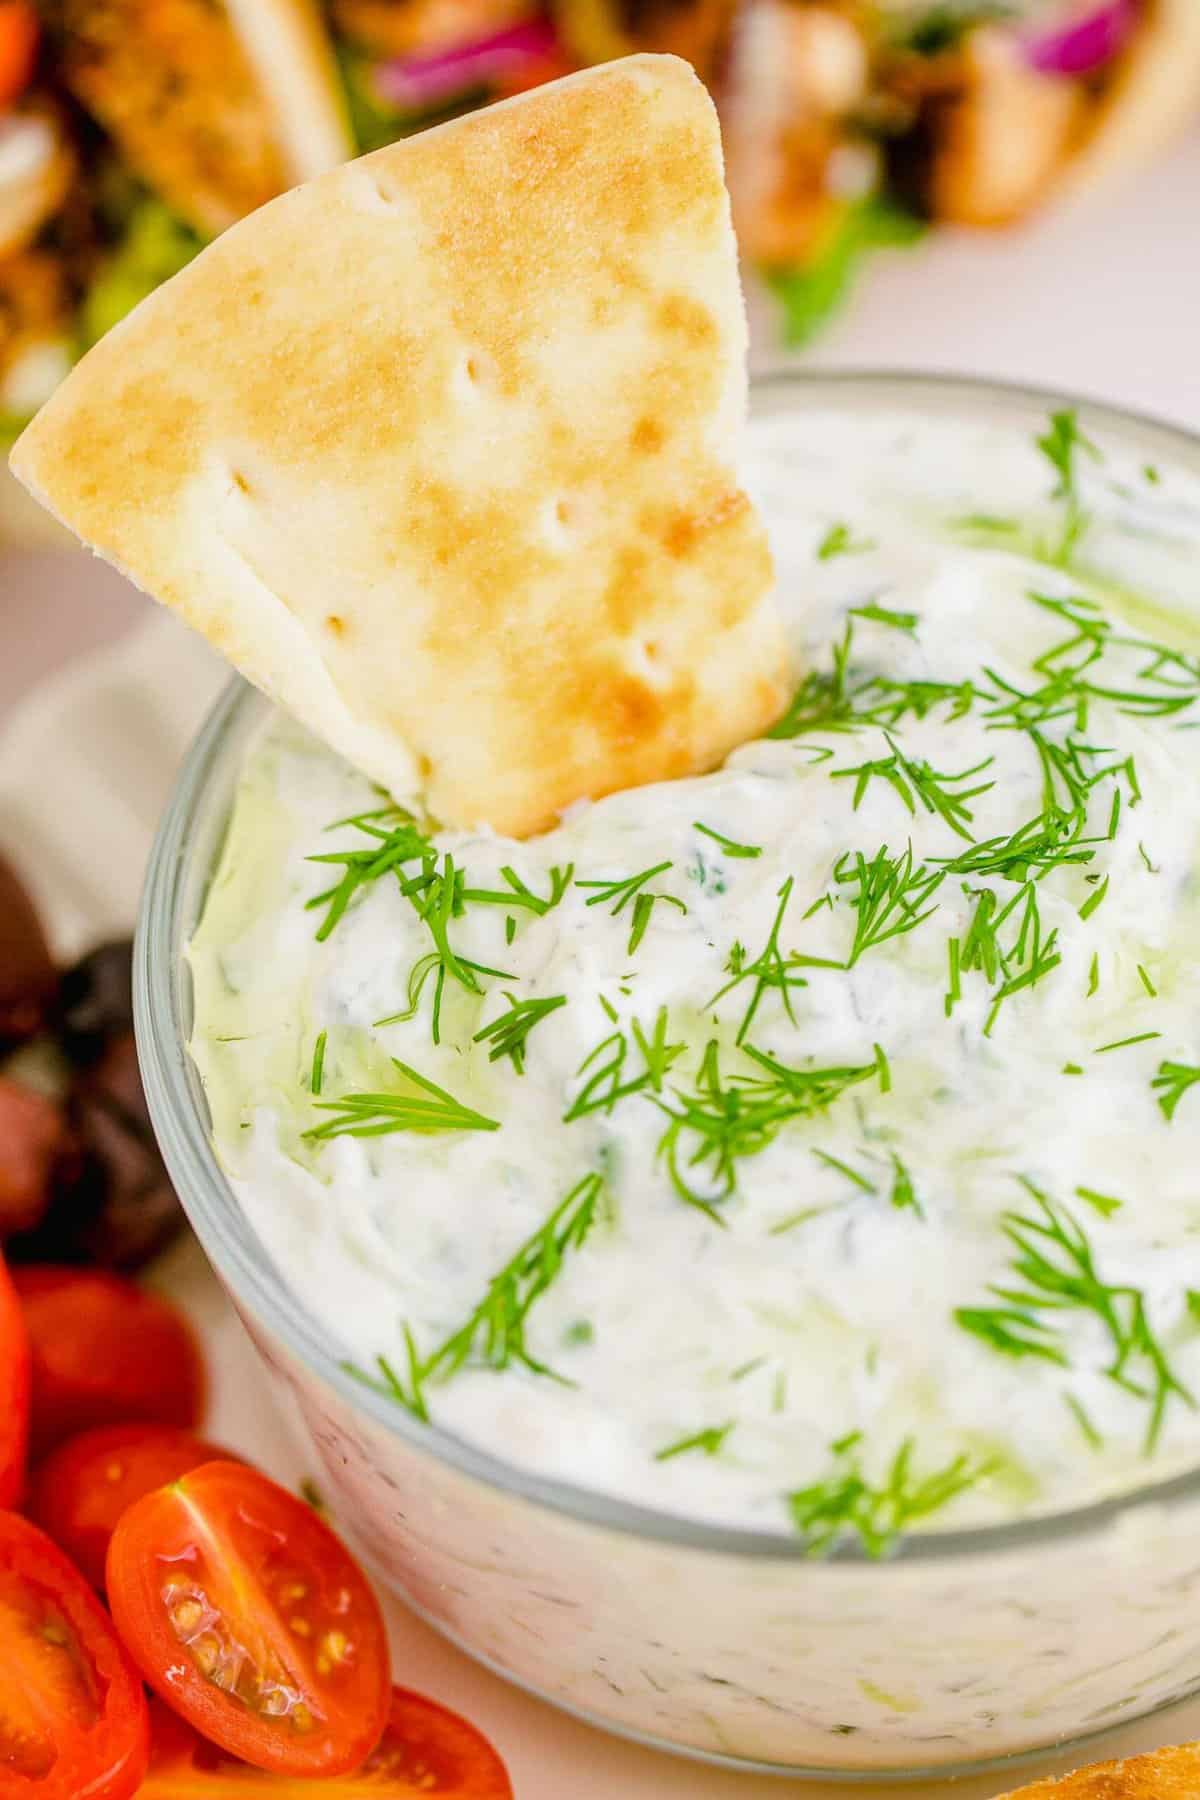 Pita chip in bowl of tzatziki dip garnished with dill and olive oil